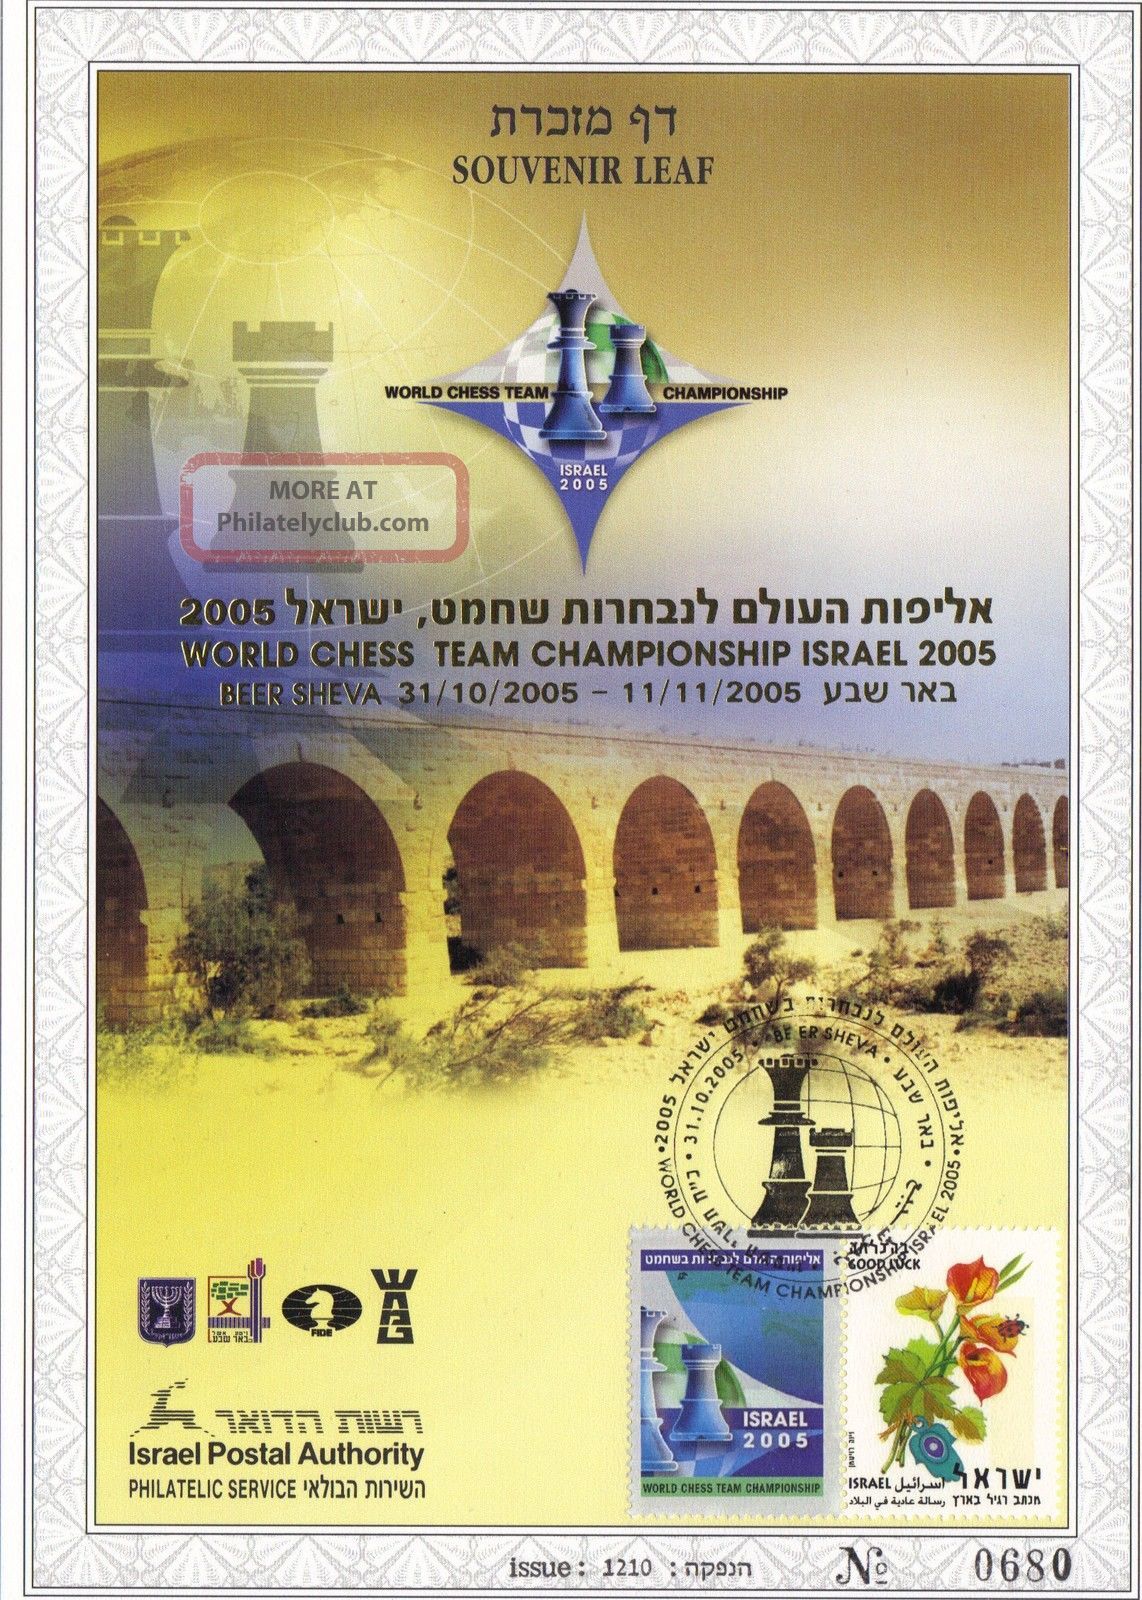 Souvenir Leaf Of World Chess Team Championship In Beer Sheva Israel 31/10/ 2005 Middle East photo